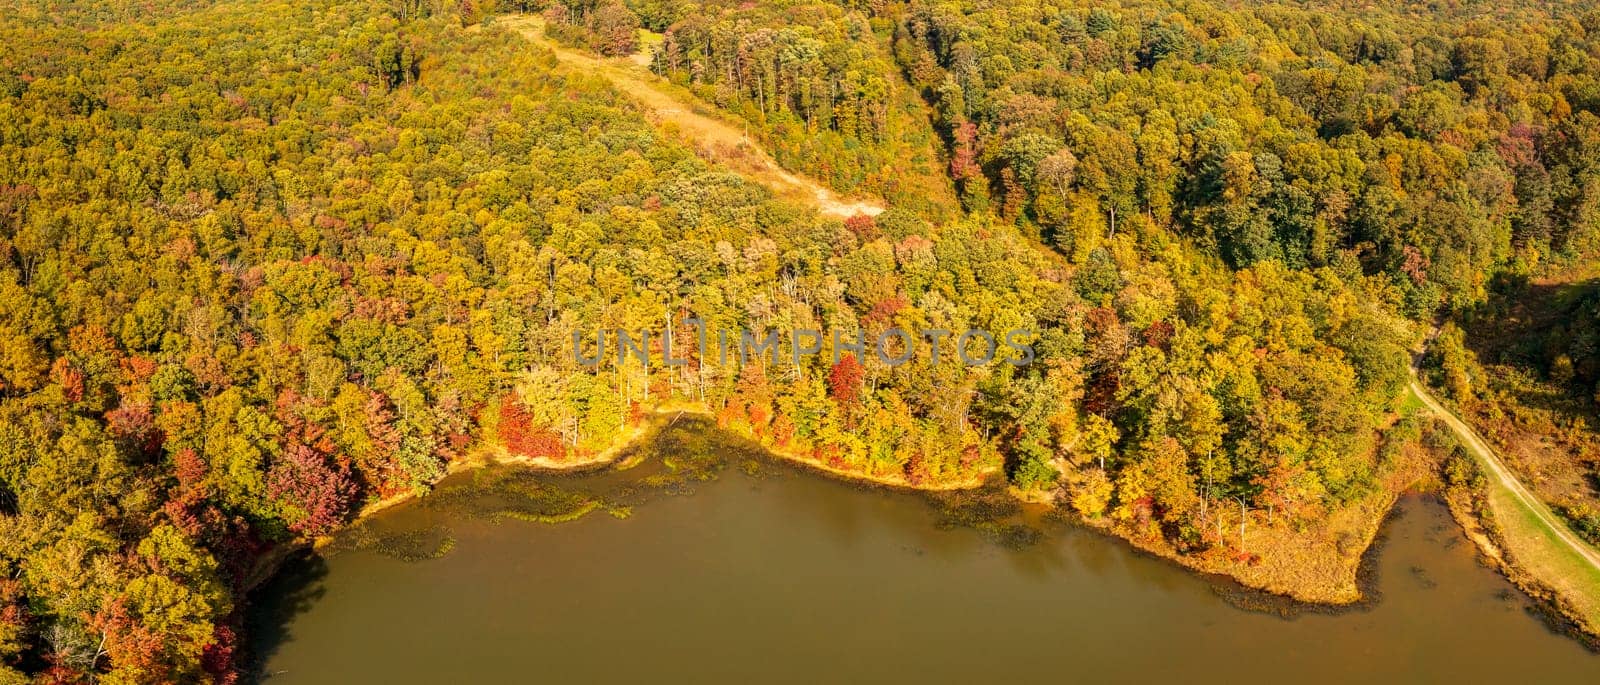 Aerial fall leaves around Coopers Rock reservoir in WV by steheap